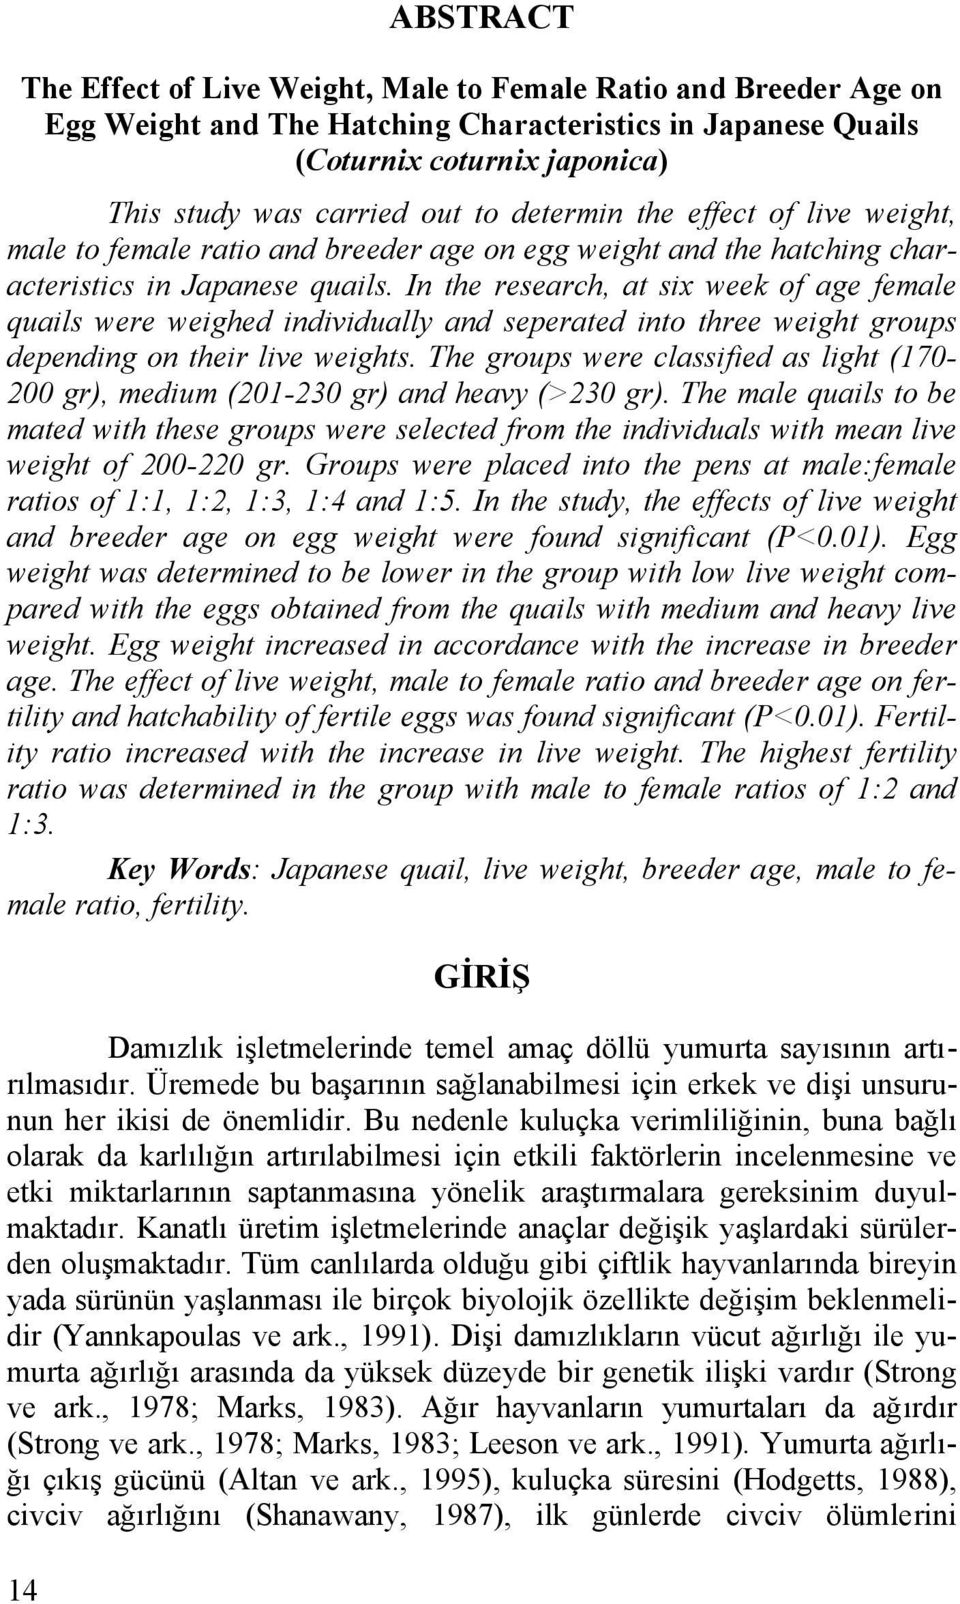 In the research, at six week of age female quails were weighed individually and seperated into three weight groups depending on their live weights.